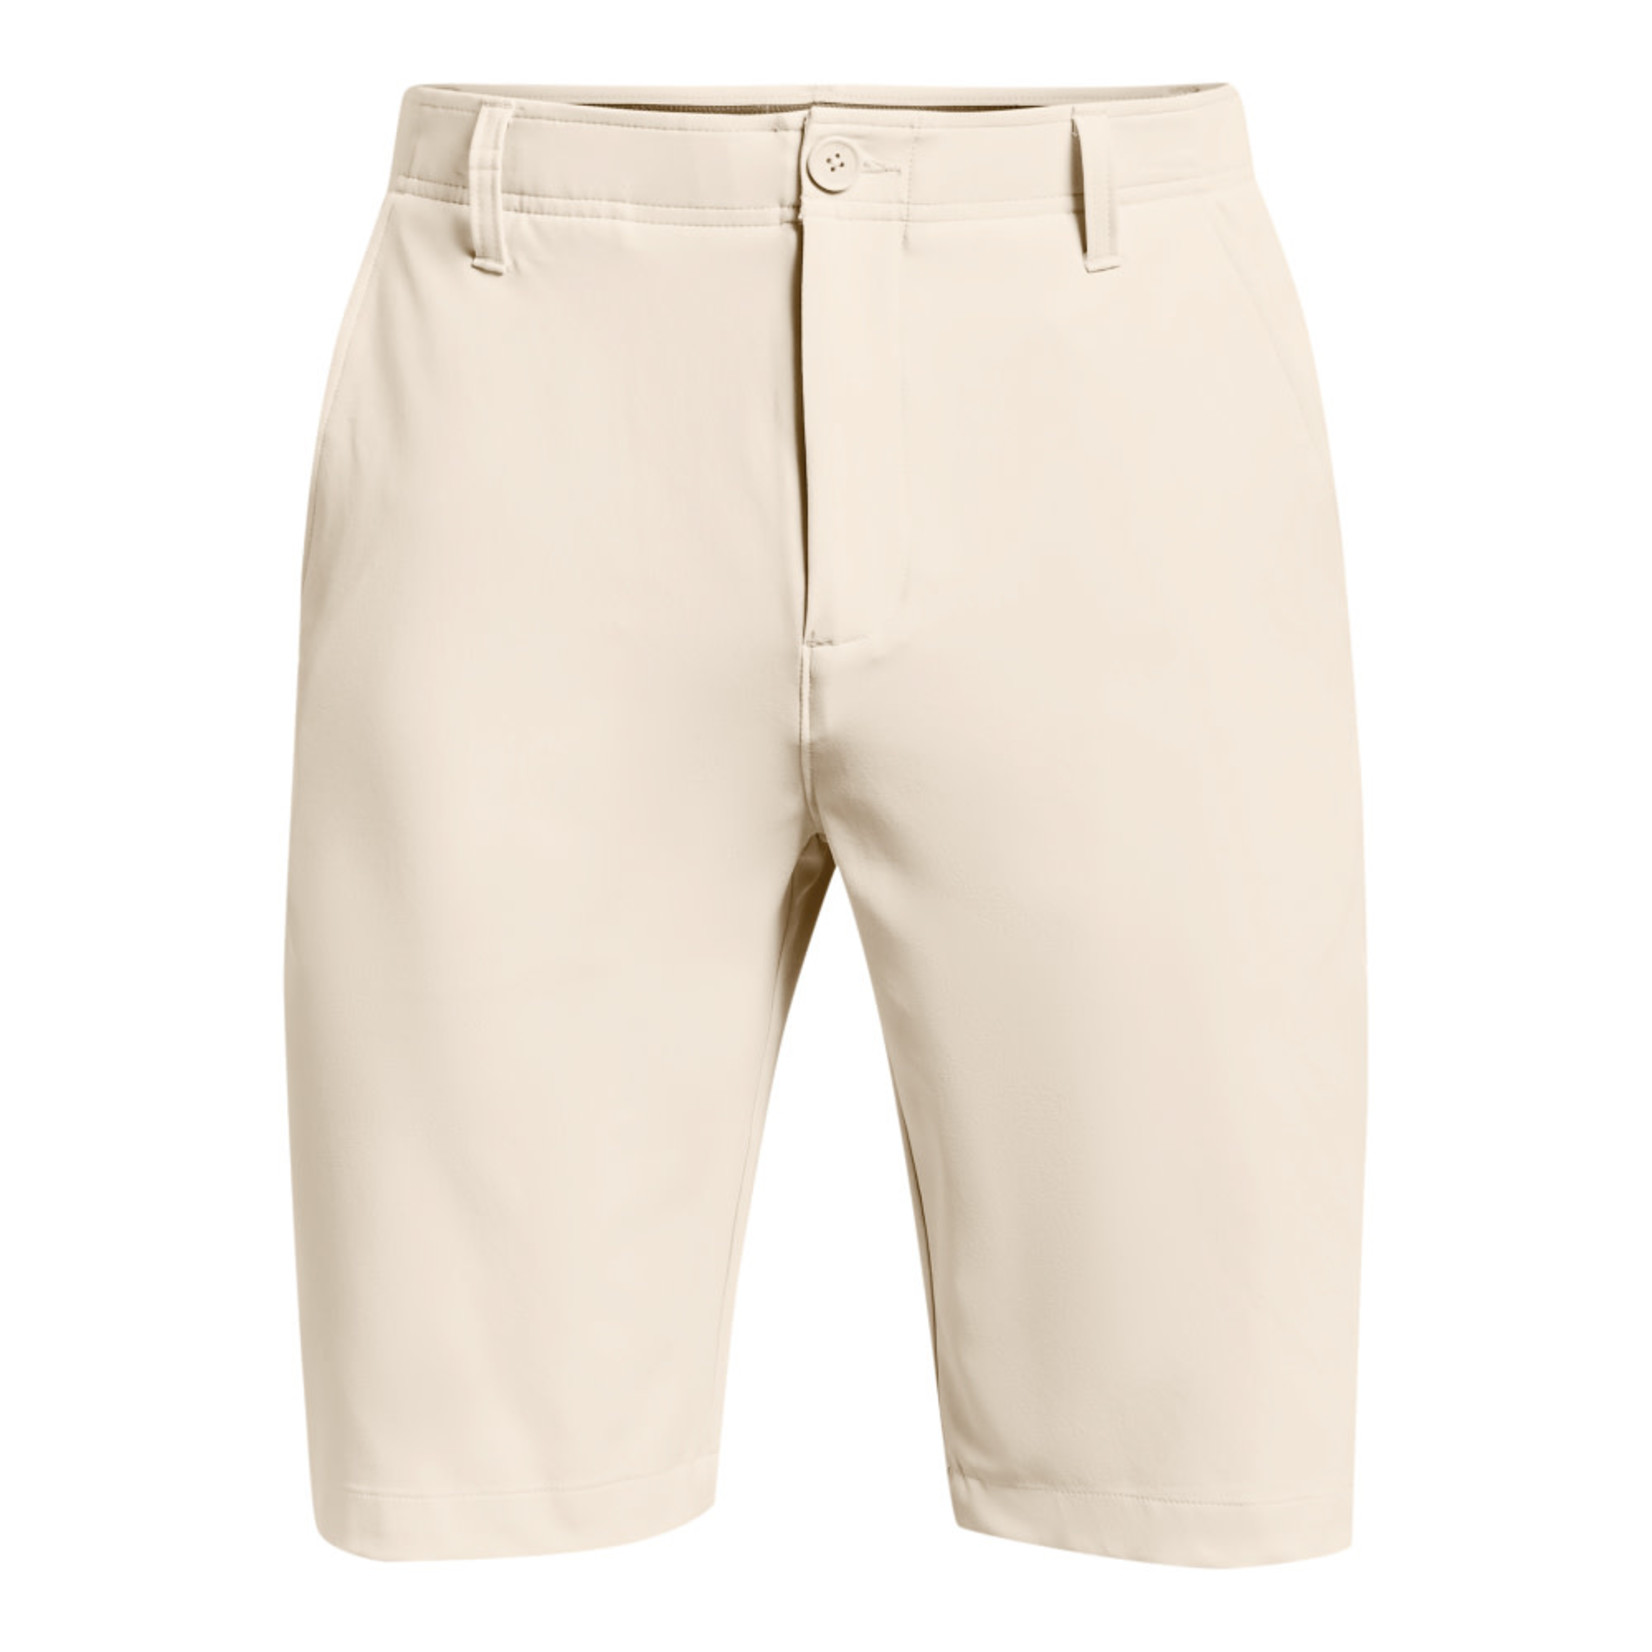 Under Armour Under Armour DRIVE TAPER Short - Summit White/Halo Grey